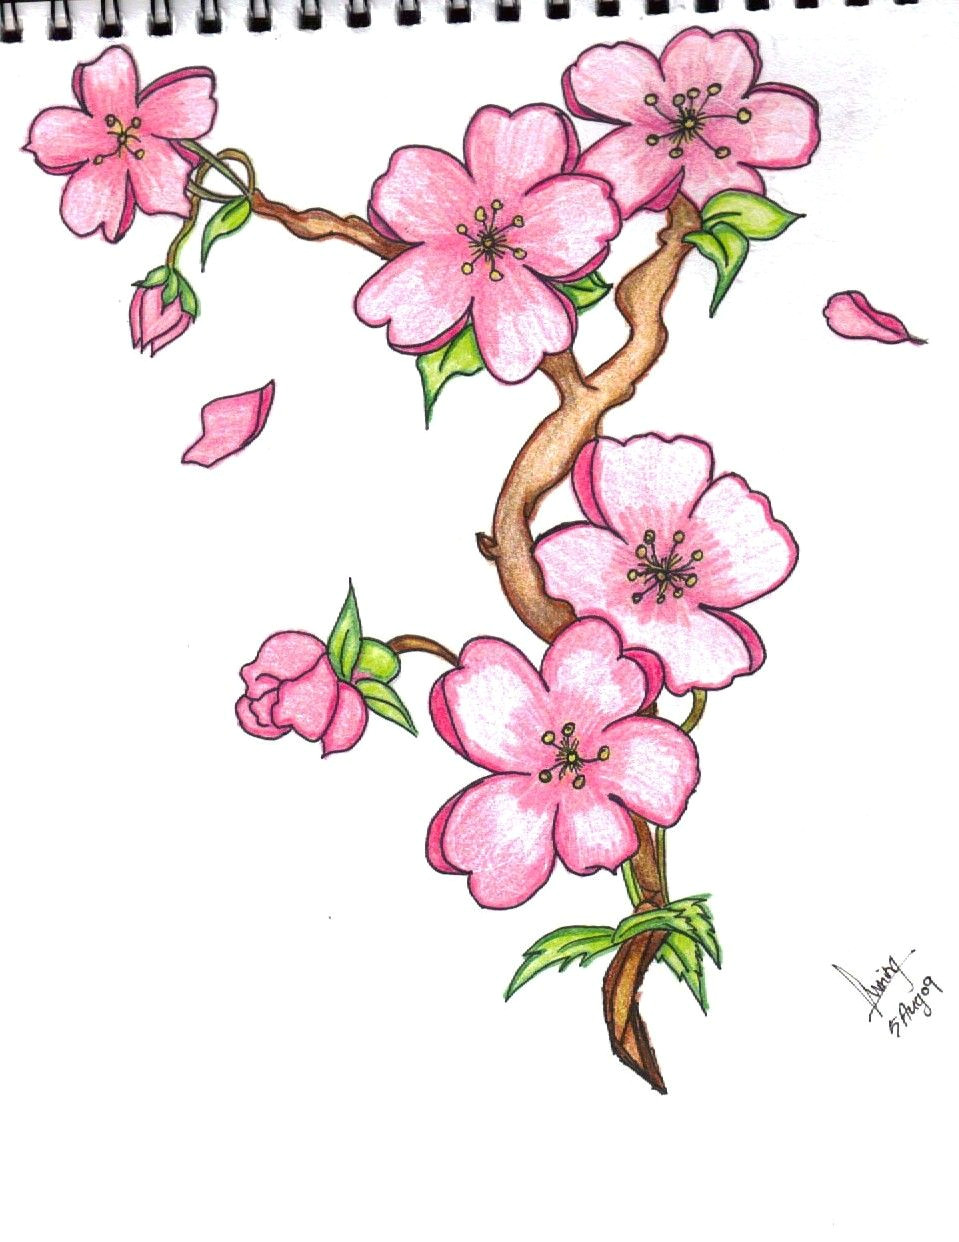 Drawings Of Chinese Flowers Pin by Marvin todd On Drawing Flowers In 2019 Pinterest Drawings